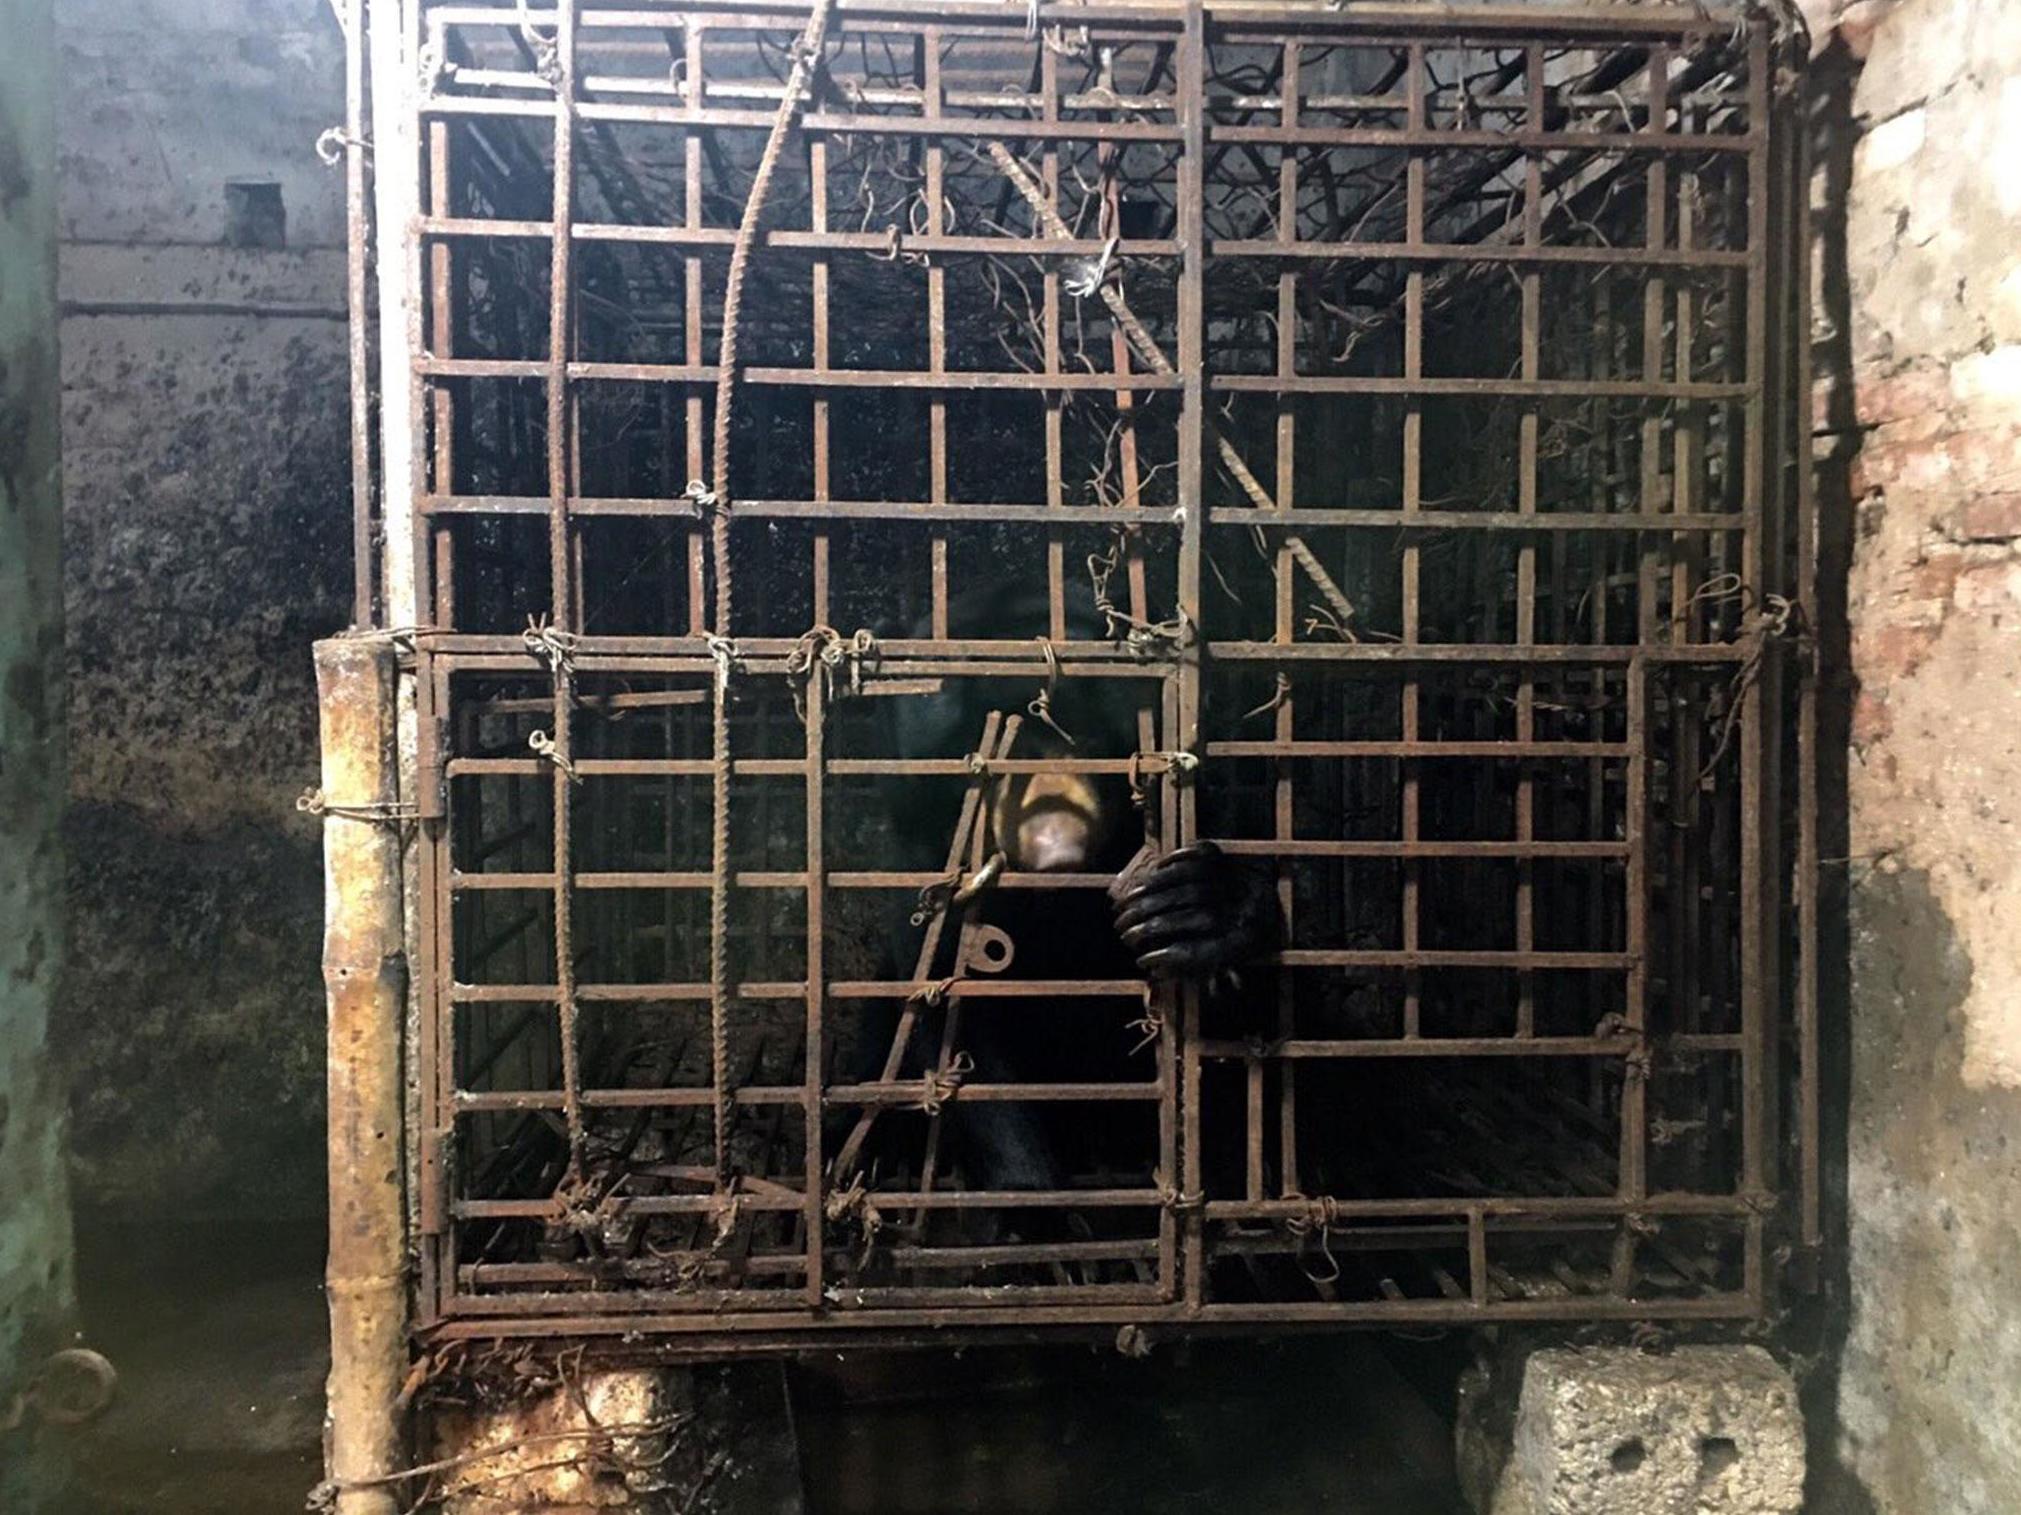 Coronavirus: China promotes bile from caged bears to treat pandemic 'caused by exploiting wildlife'